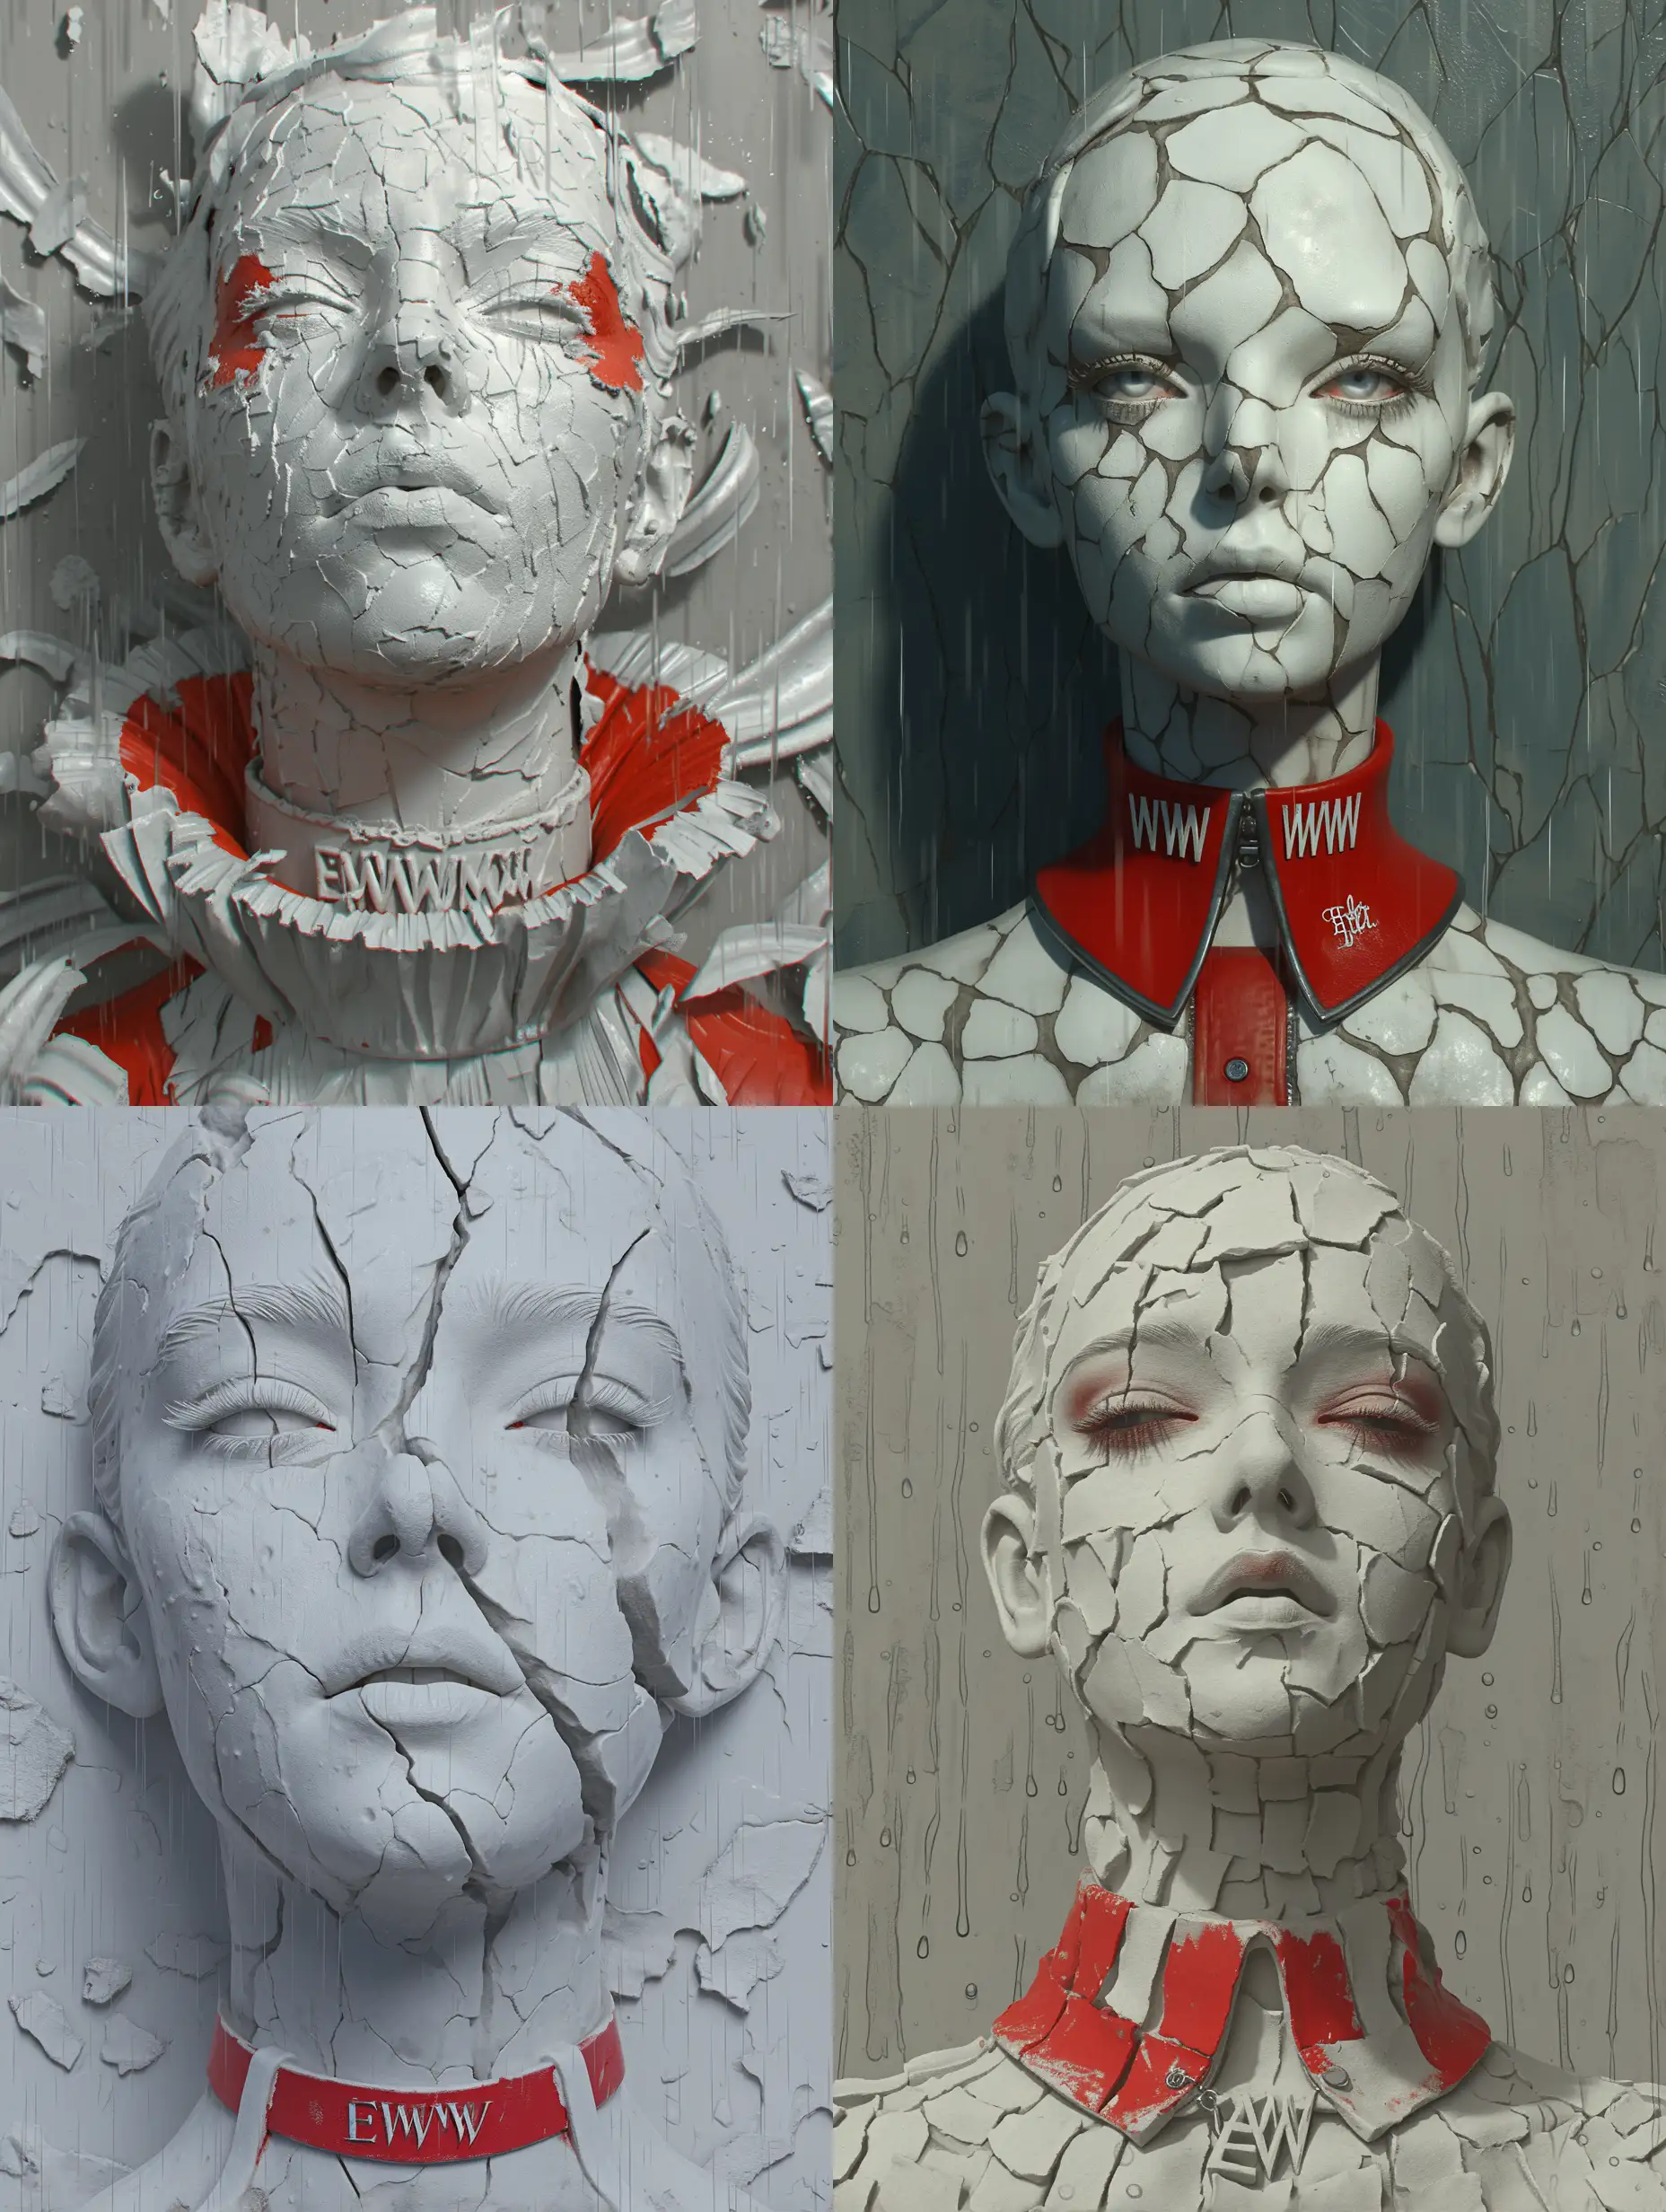 Surreal-Plaster-Sculpture-of-Woman-with-EWW-Collar-in-Daliesque-Style